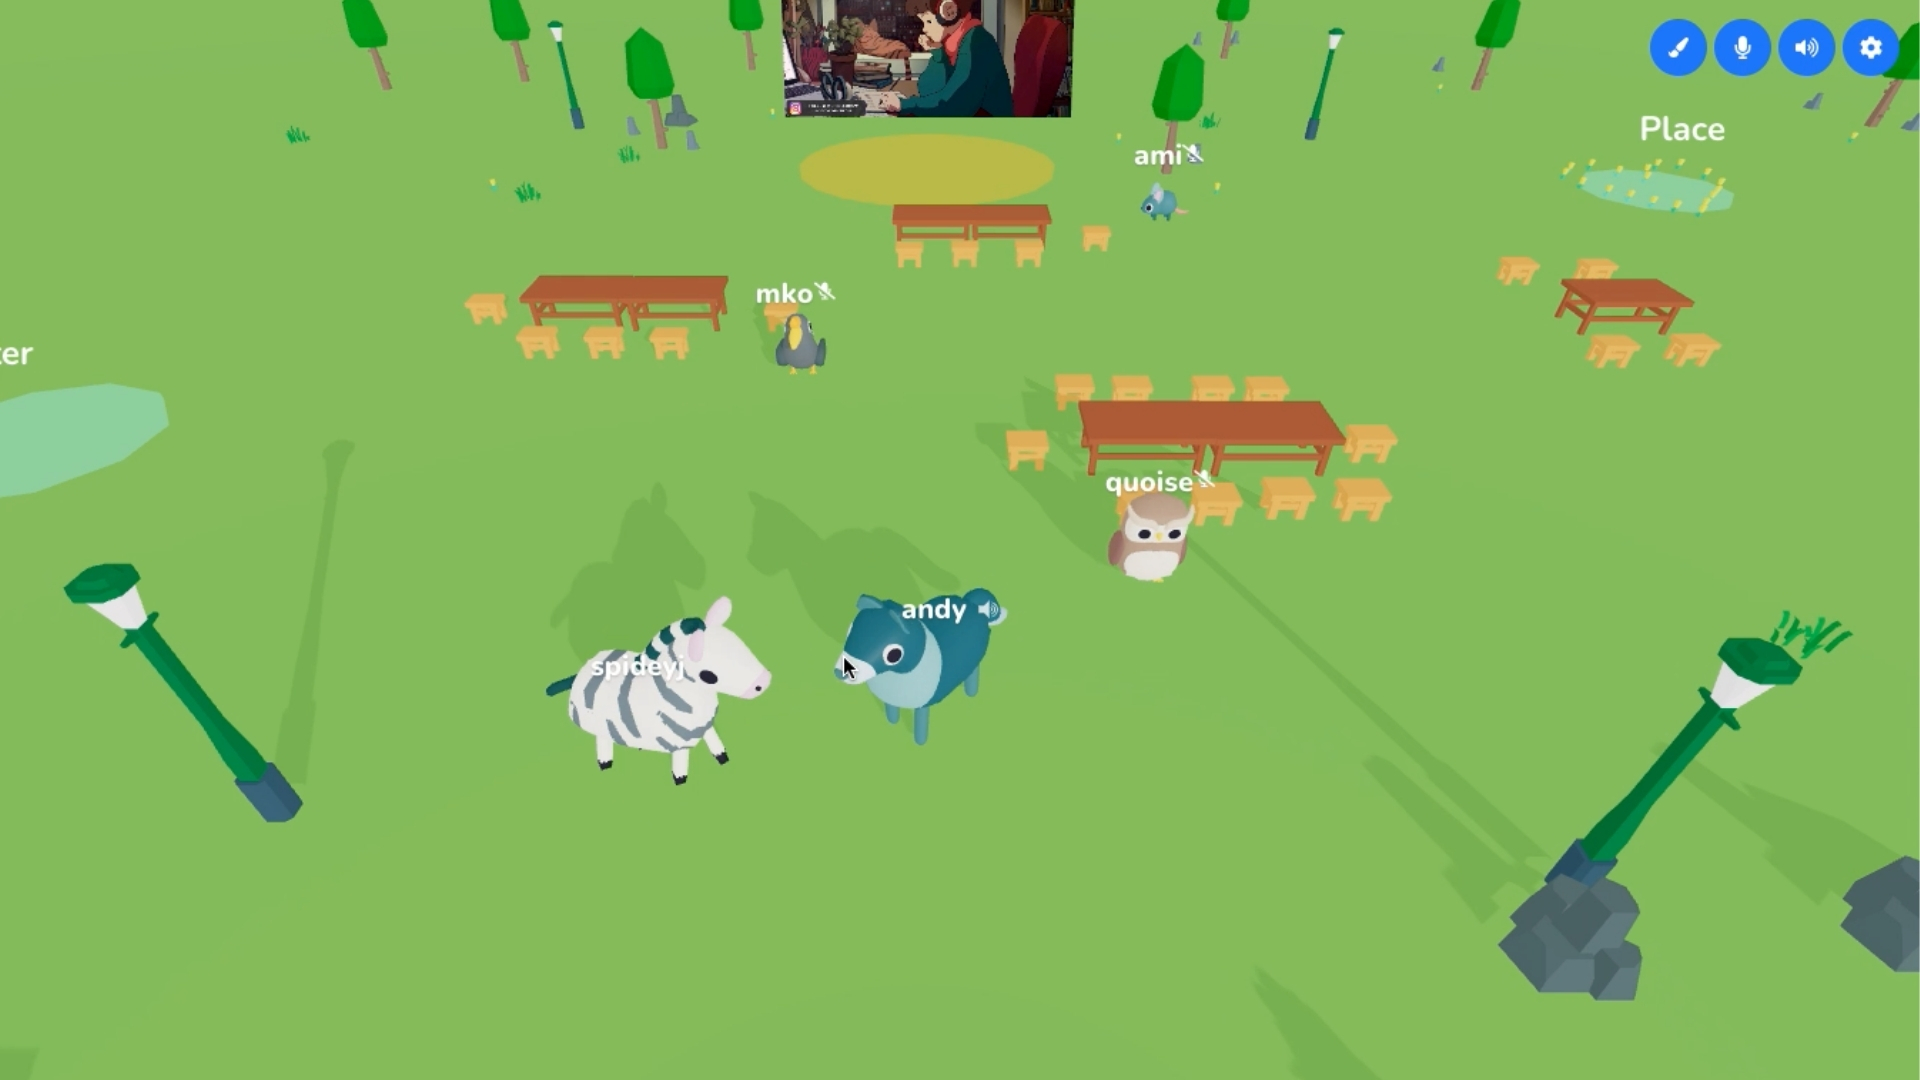 Skittish is what you'd get if you crossed Animal Crossing with Clubhouse |  TechCrunch